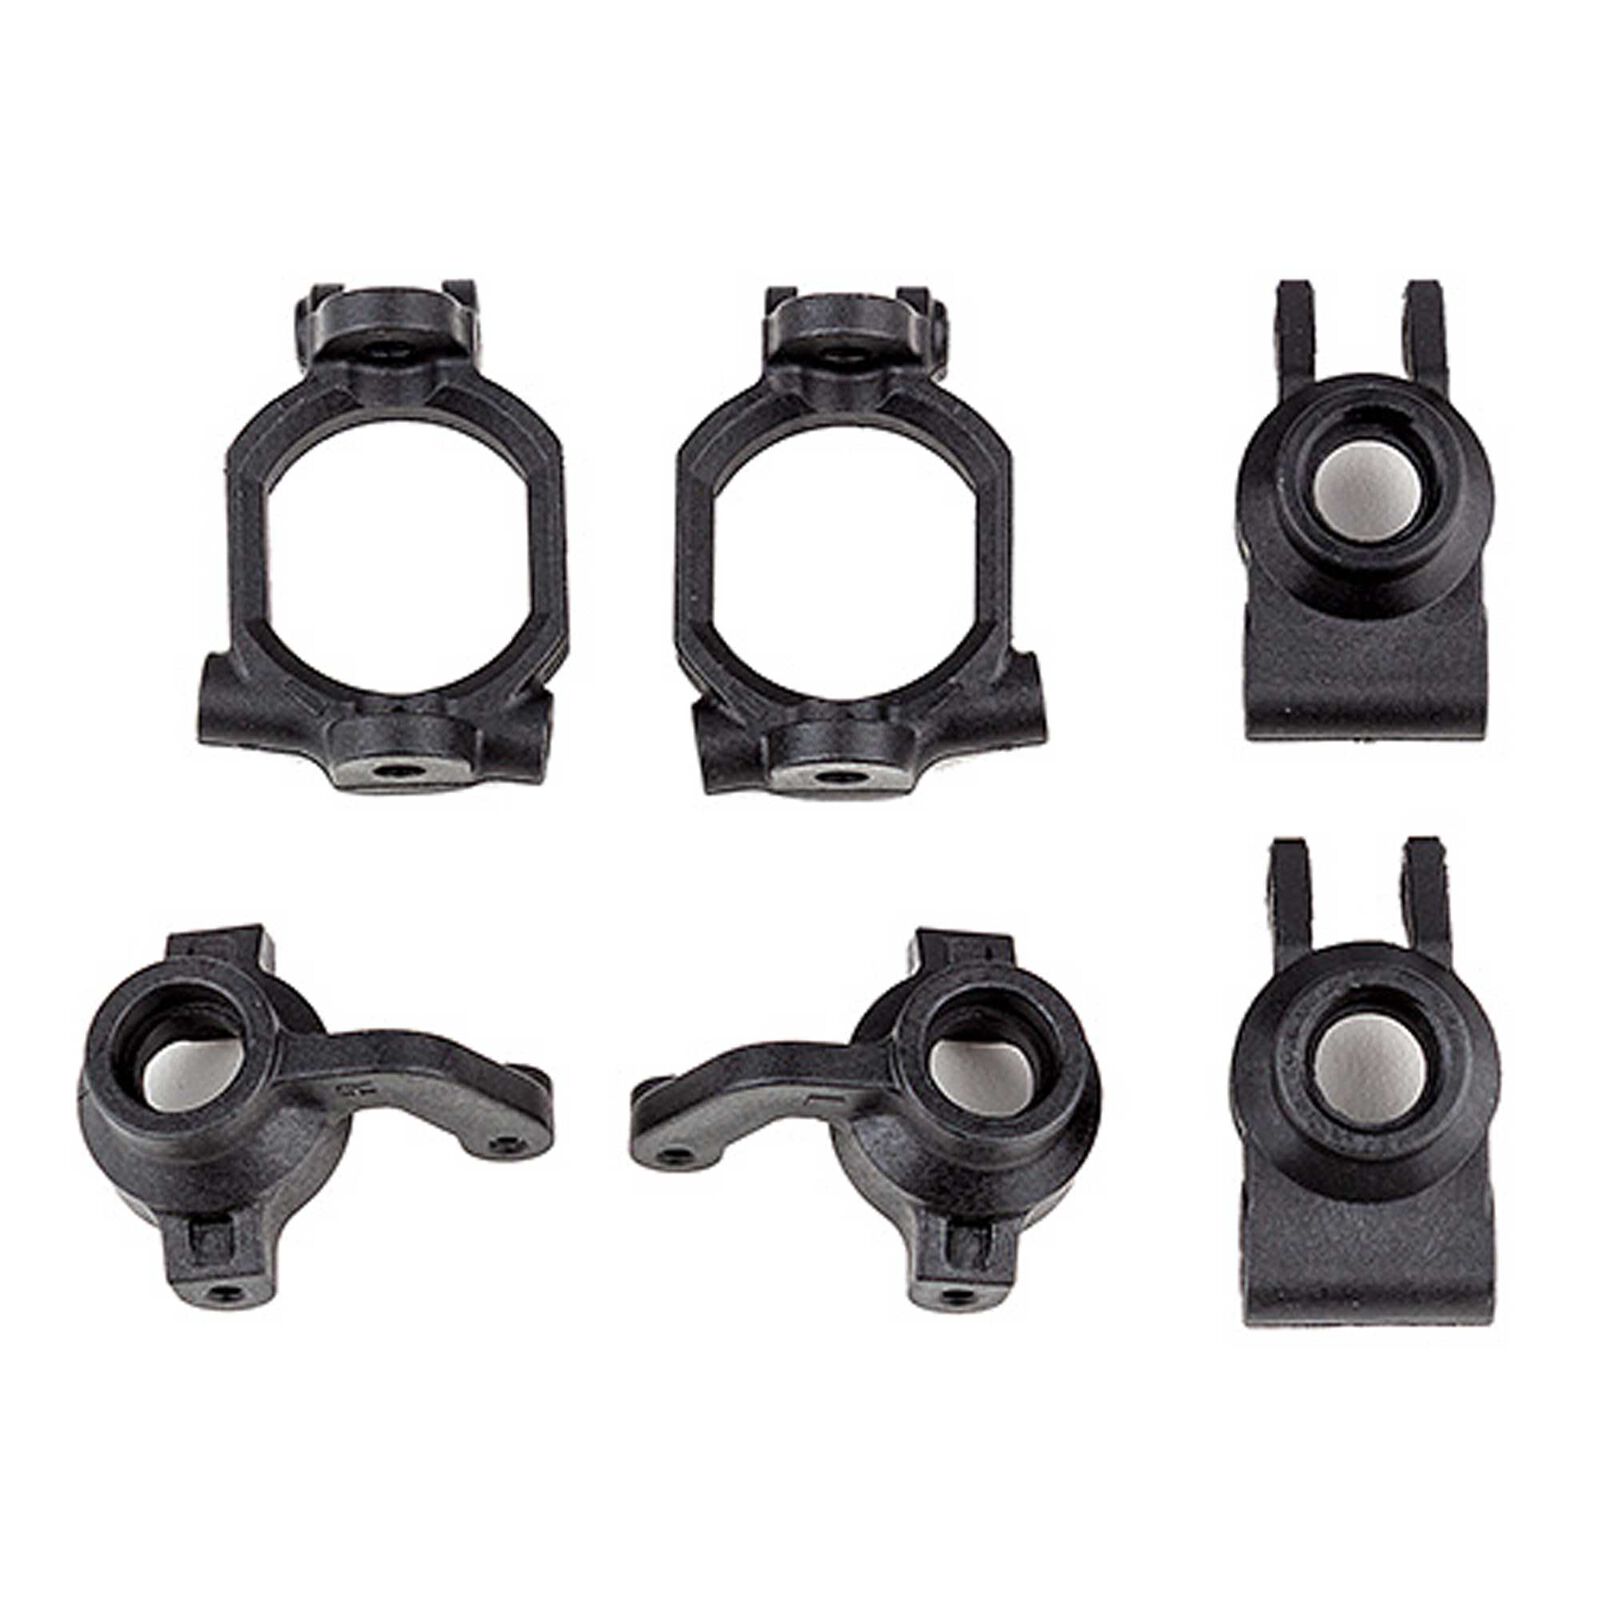 Caster and Steering Block Set: Rival MT10